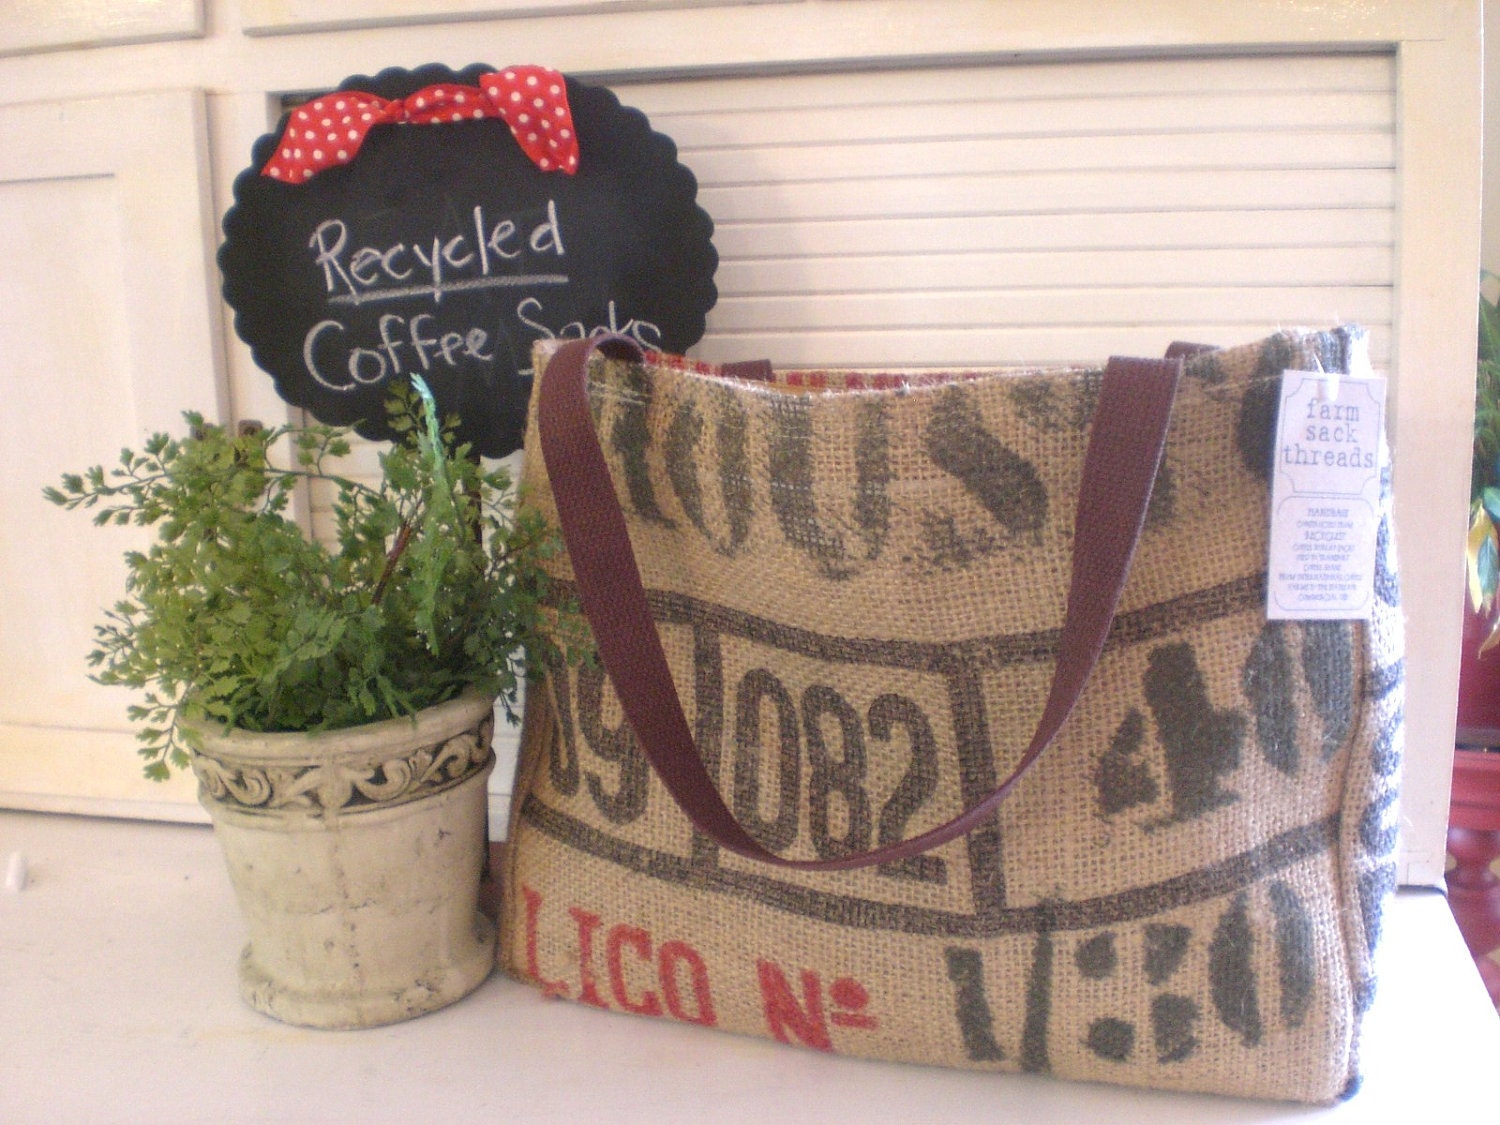 Bags for Brides: 4 burlap totes from RECYCLED by primitivenproper